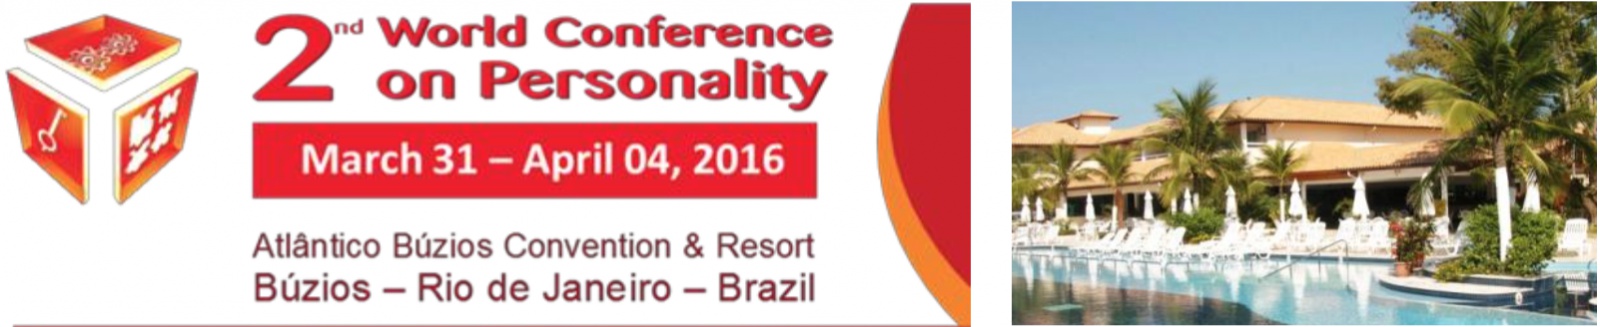 Banner 2nd World Conference on Personality